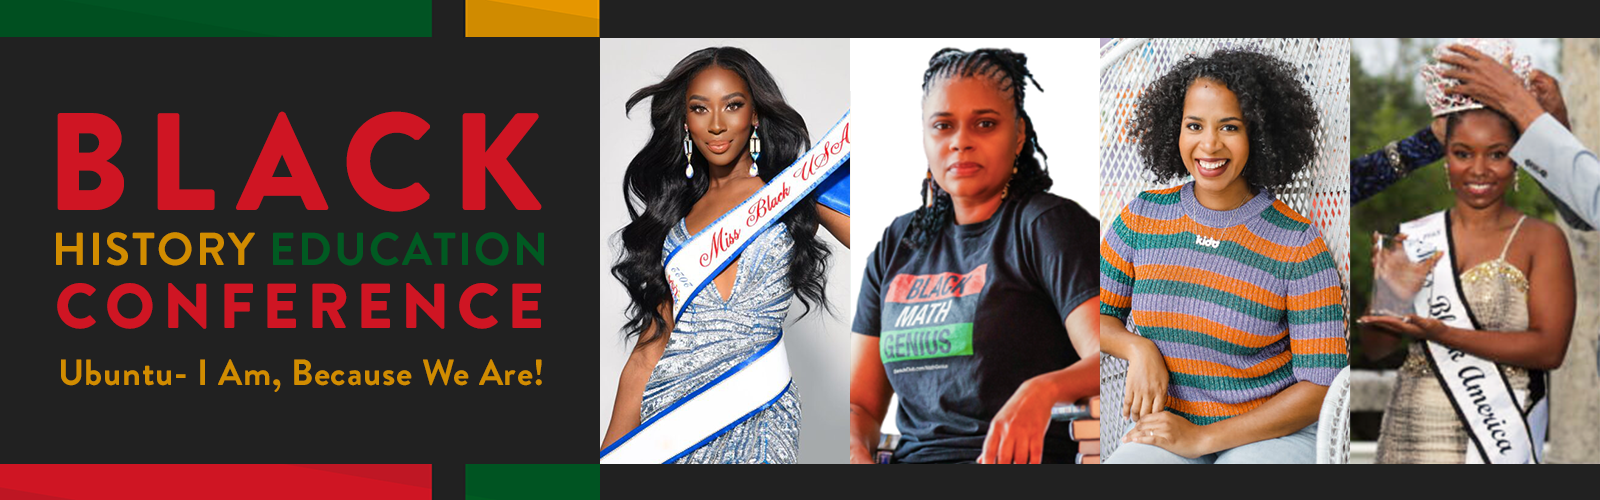 Black History Education Conference graphic with red, yellow and green text and photos of the four women keynote speakers.